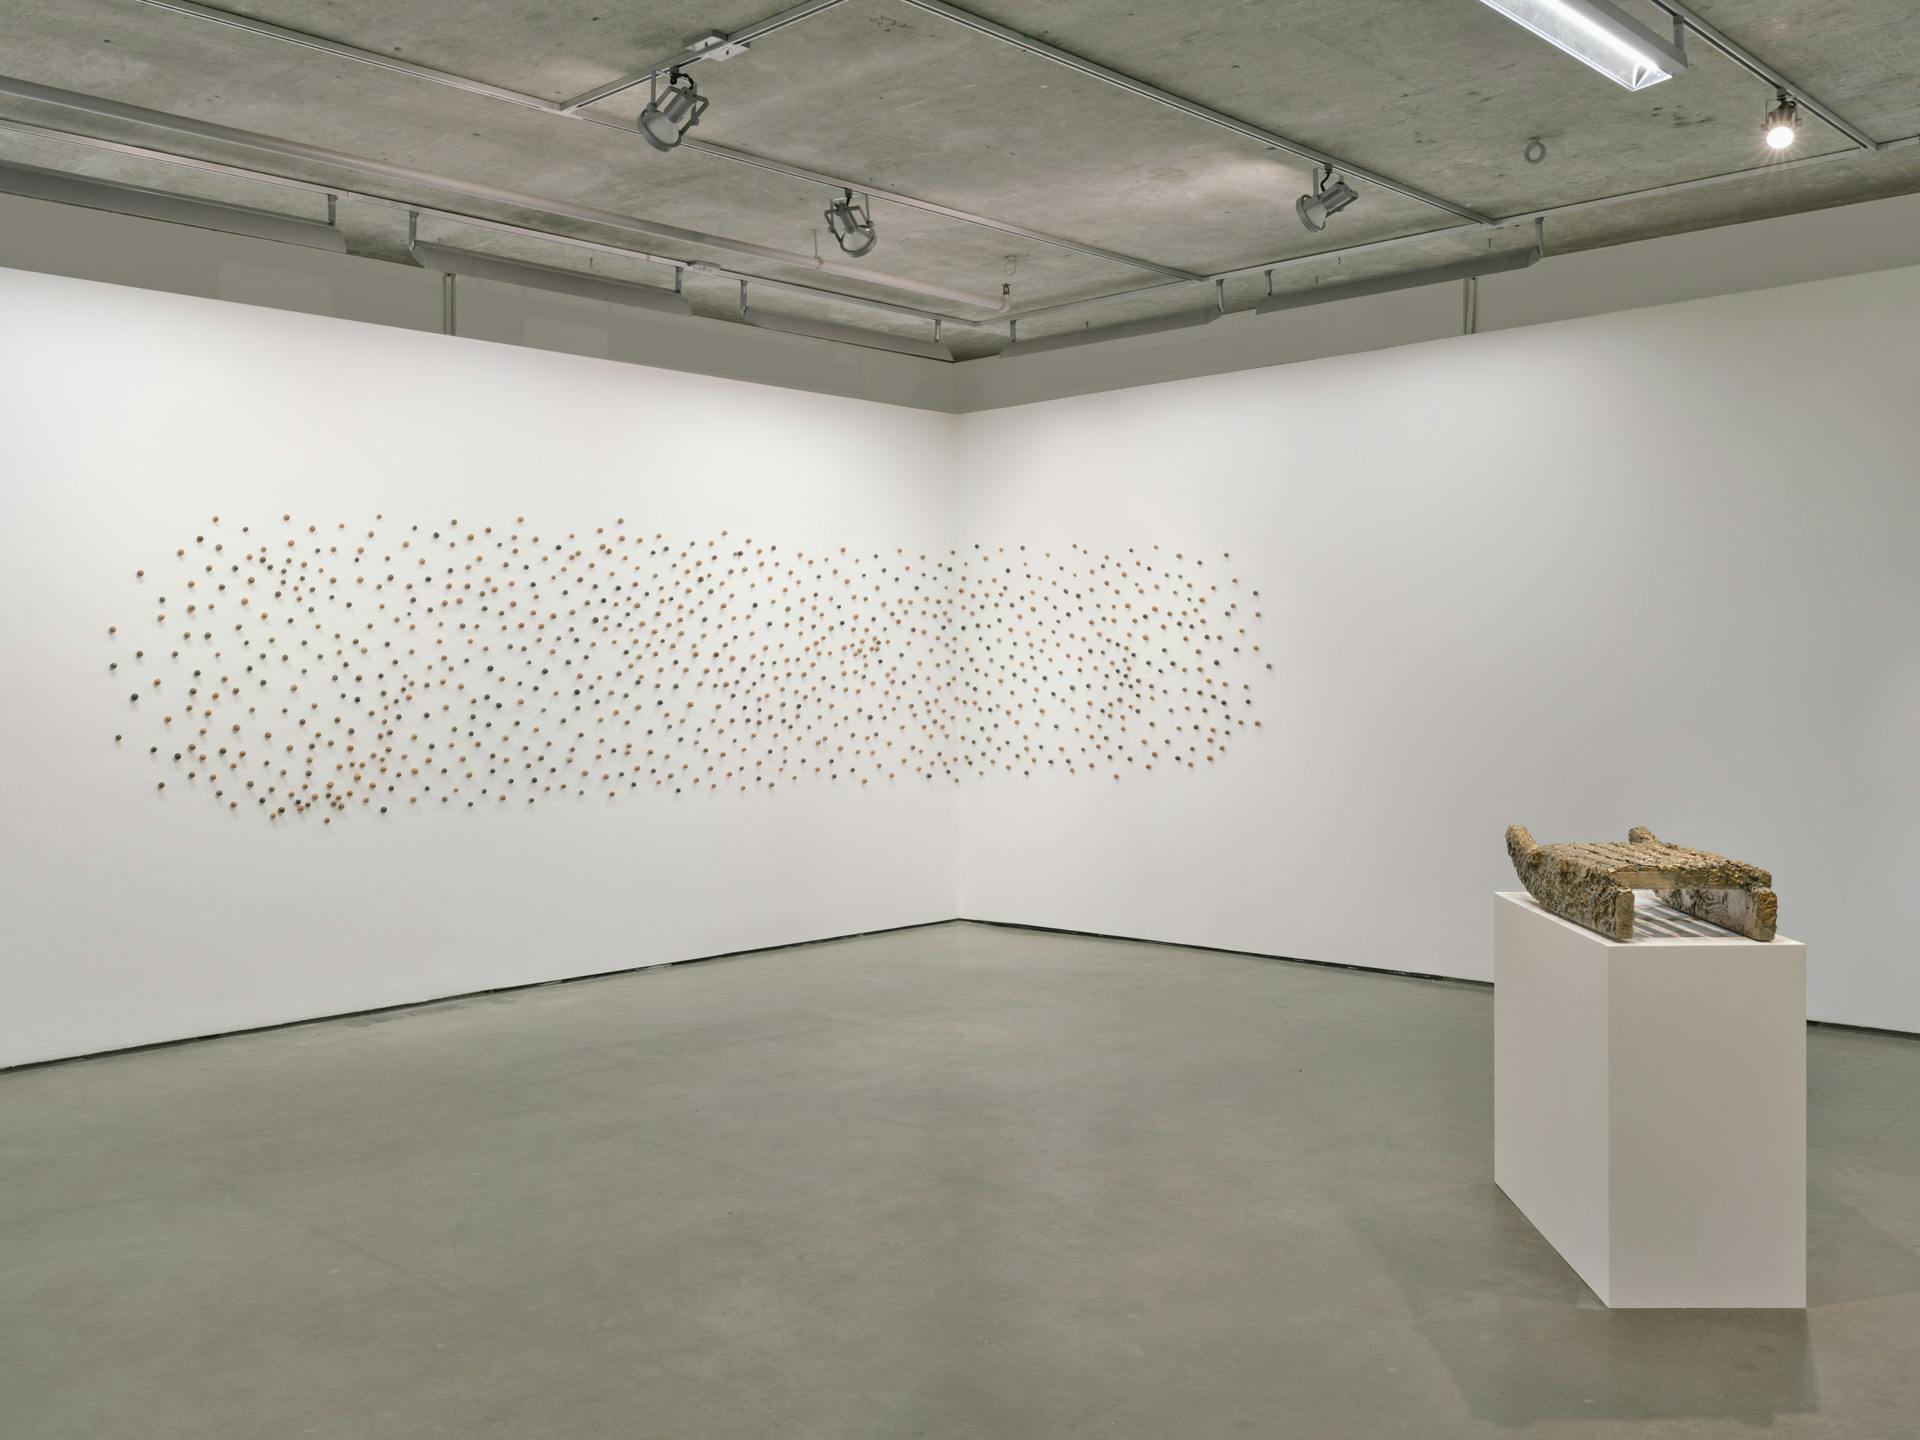 A thousand small clay beads are pinned across two walls in an amorphous shape, with most of the beads displayed on the left wall. In the foreground is a sculpture of a child's sled on a plinth.